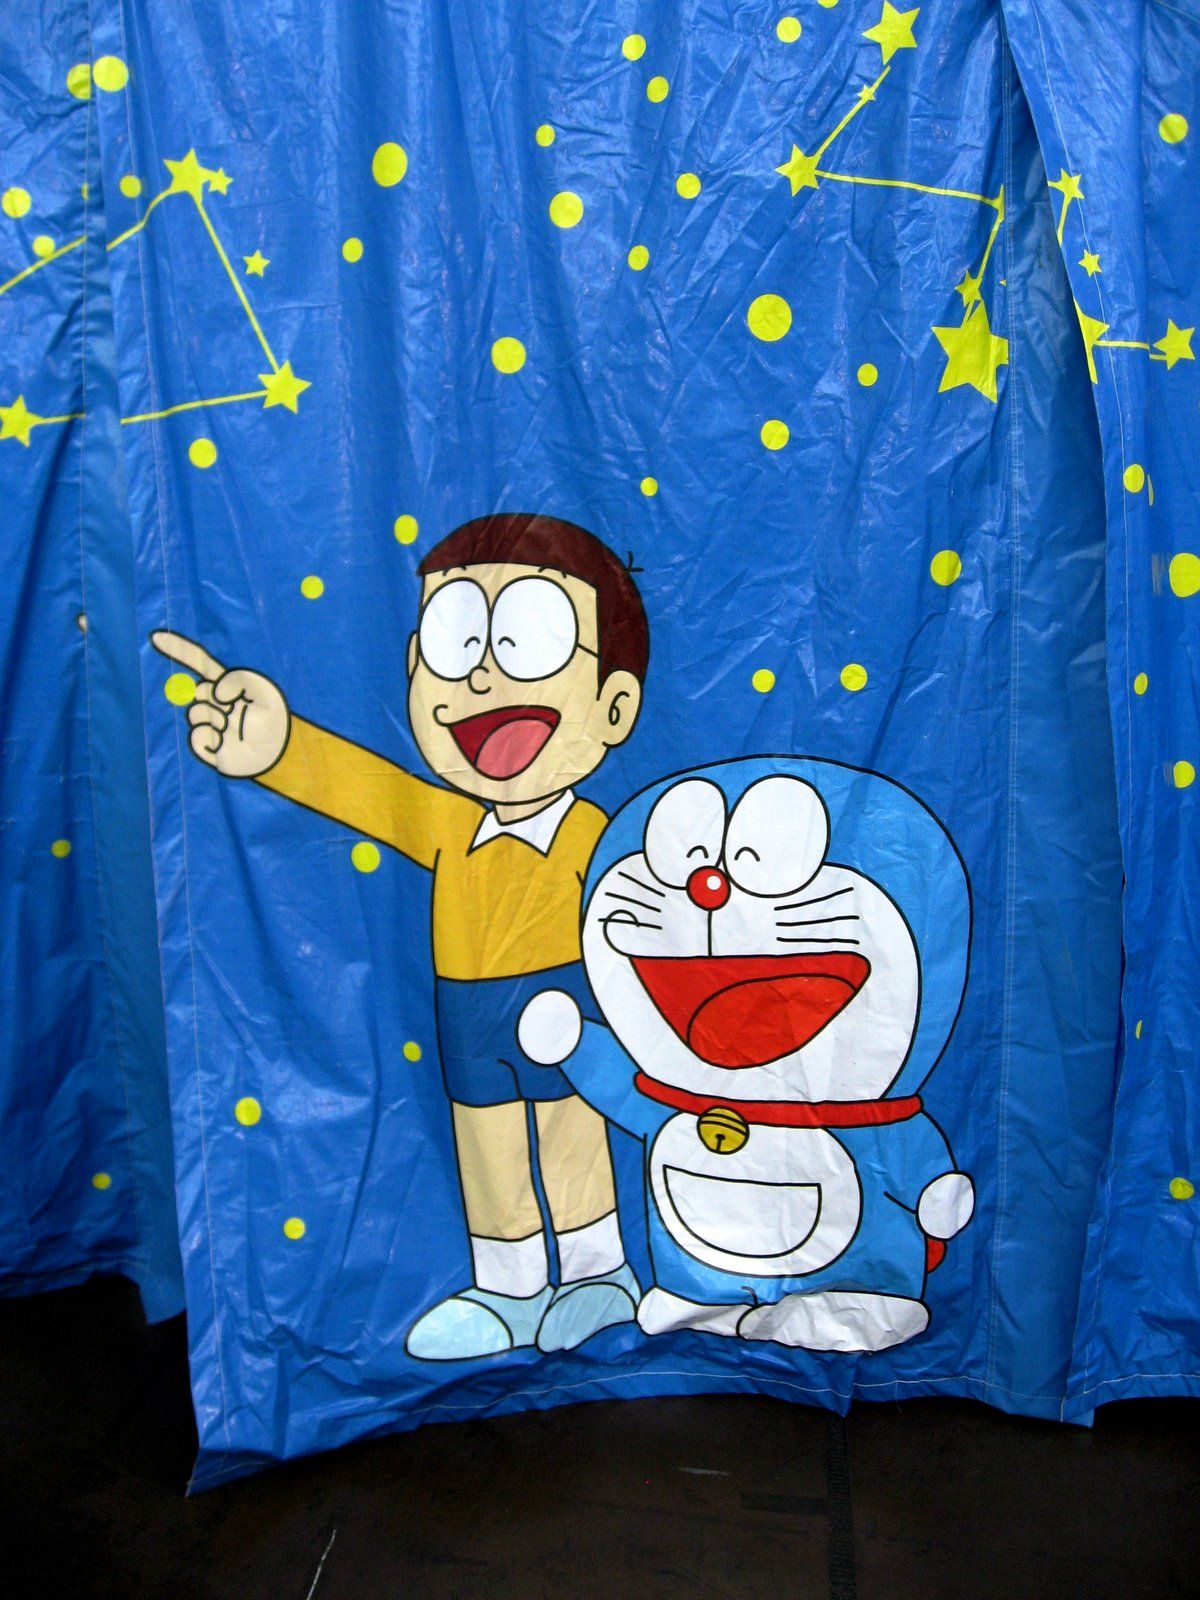 Doraemon HD Wallpaper Pictures Image And Photos Gallary